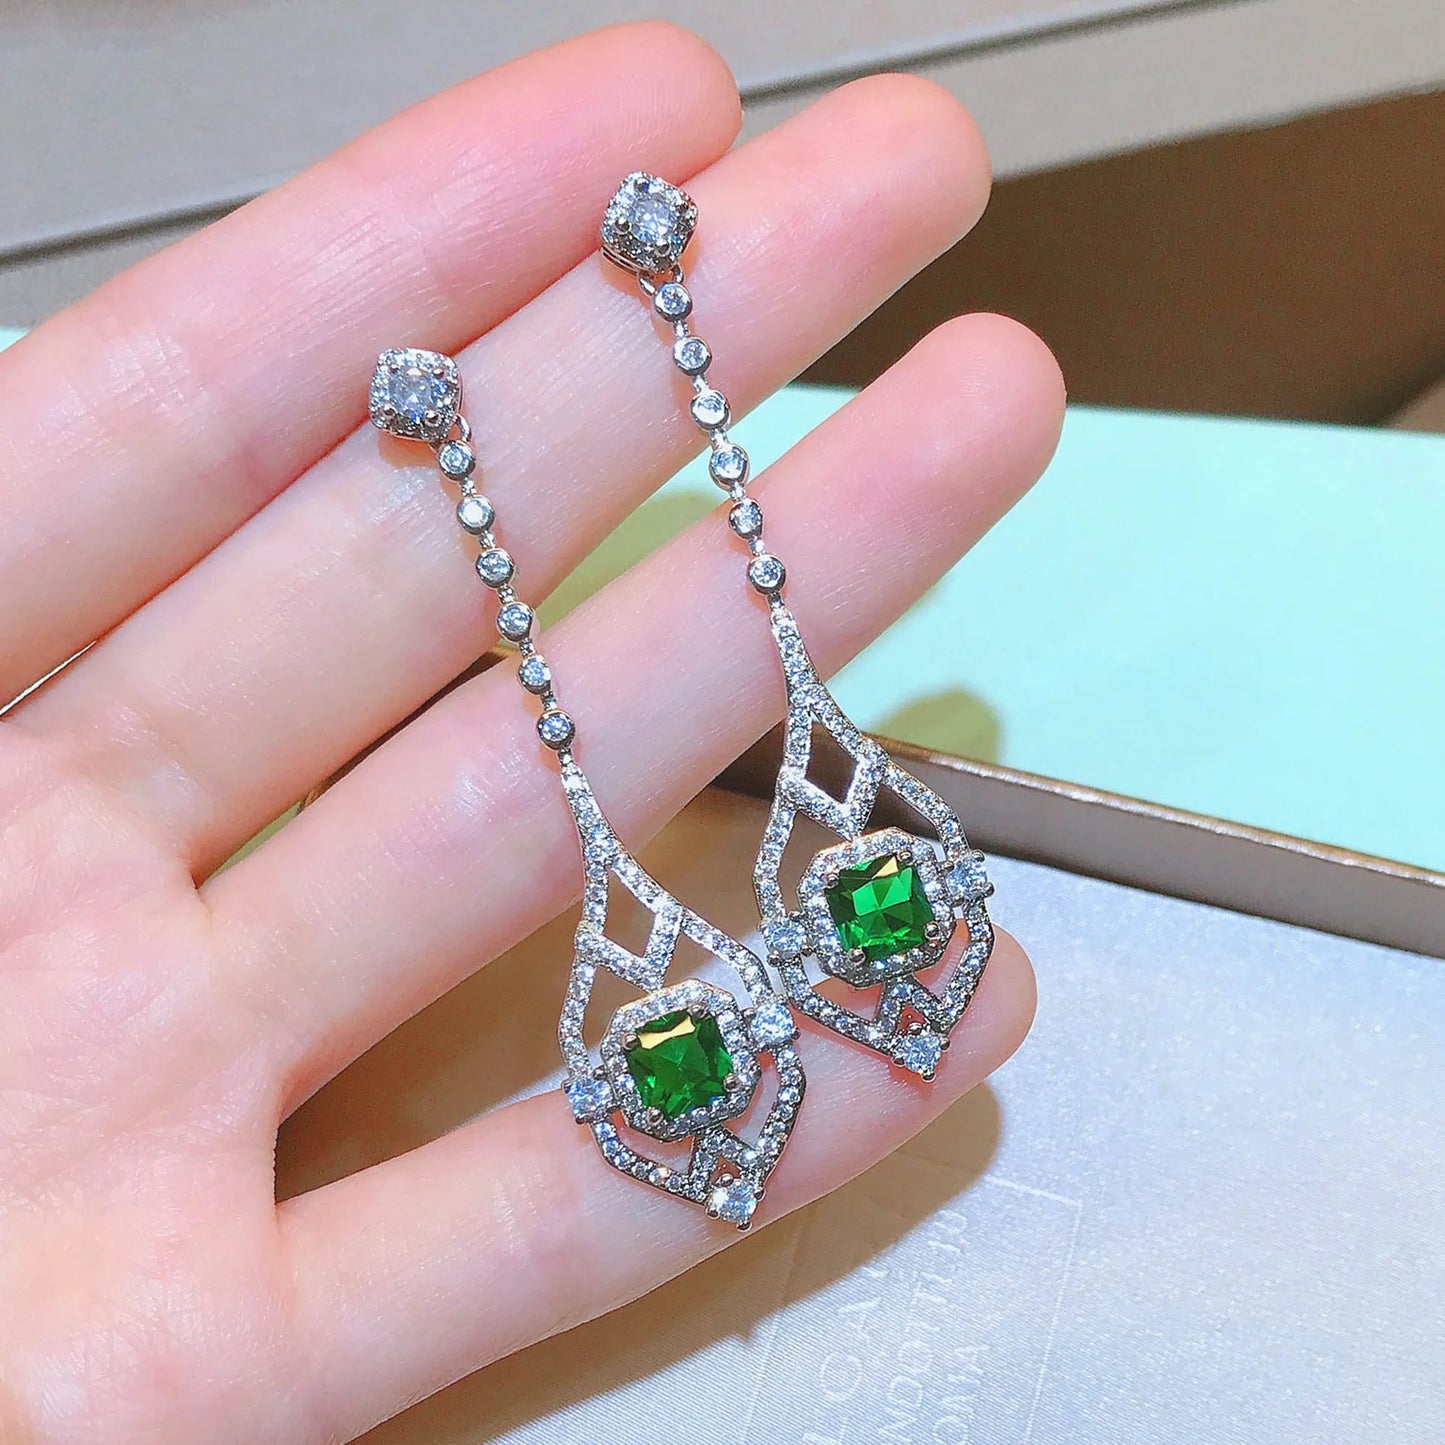 RUZZALLATI 2022 New Vintage Antique Lab Emerald Jewelry  Silver Color Hollow Design Long Drop Earring for Women Dangler Gift